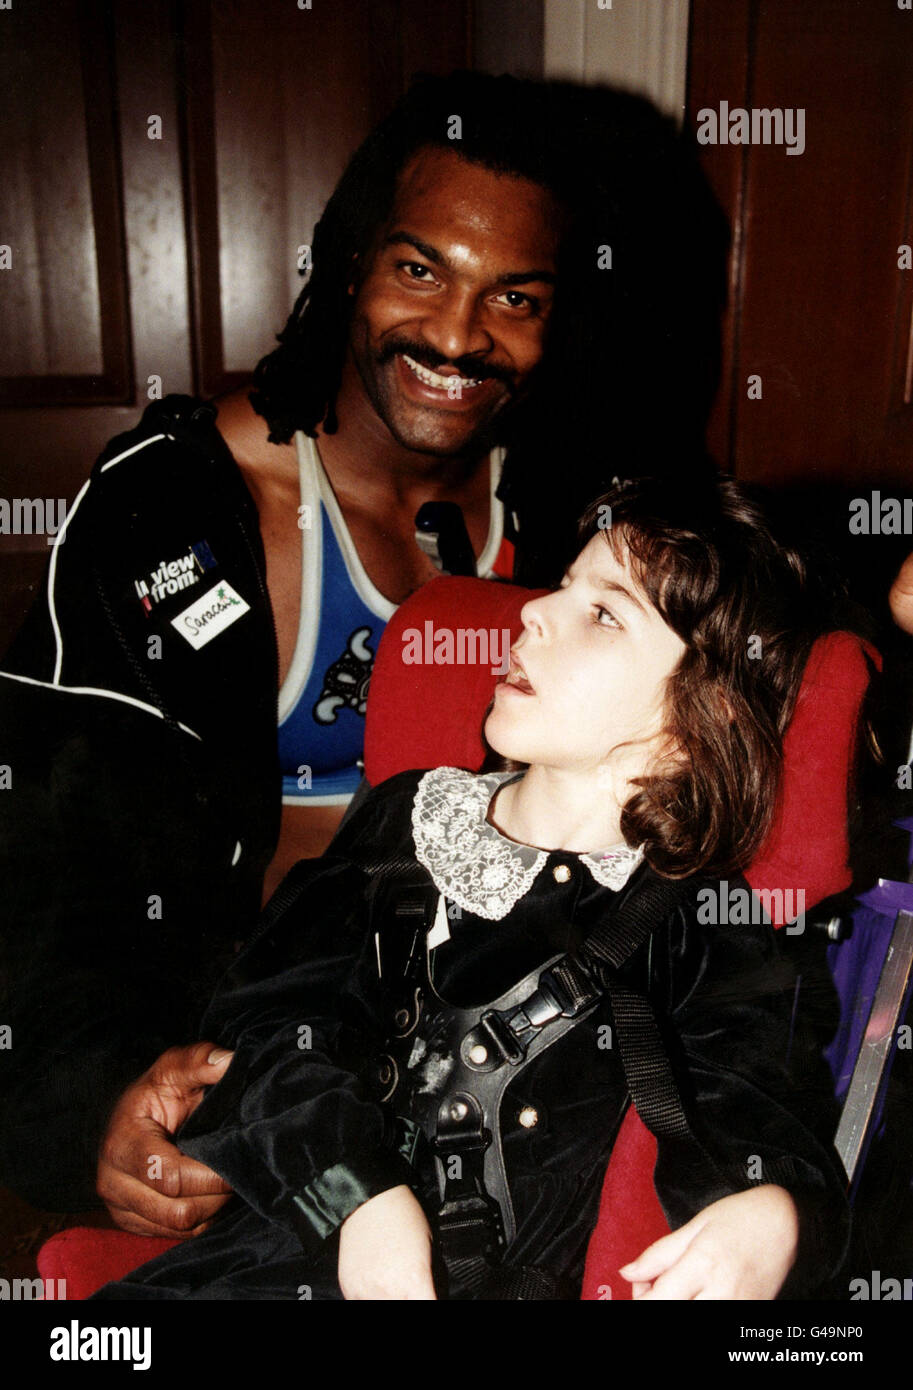 PA NEWS PHOTO 8/12/97  GLADIATOR 'SARACEN' POSES WITH A YOUNG PARTYGOER AT THE EVENT HOSTED BY CHANCELLOR GORDON BROWN AT NO.11 DOWNING STREET, LONDON IN AID OF THE CHARITY 'SCOPE' Stock Photo